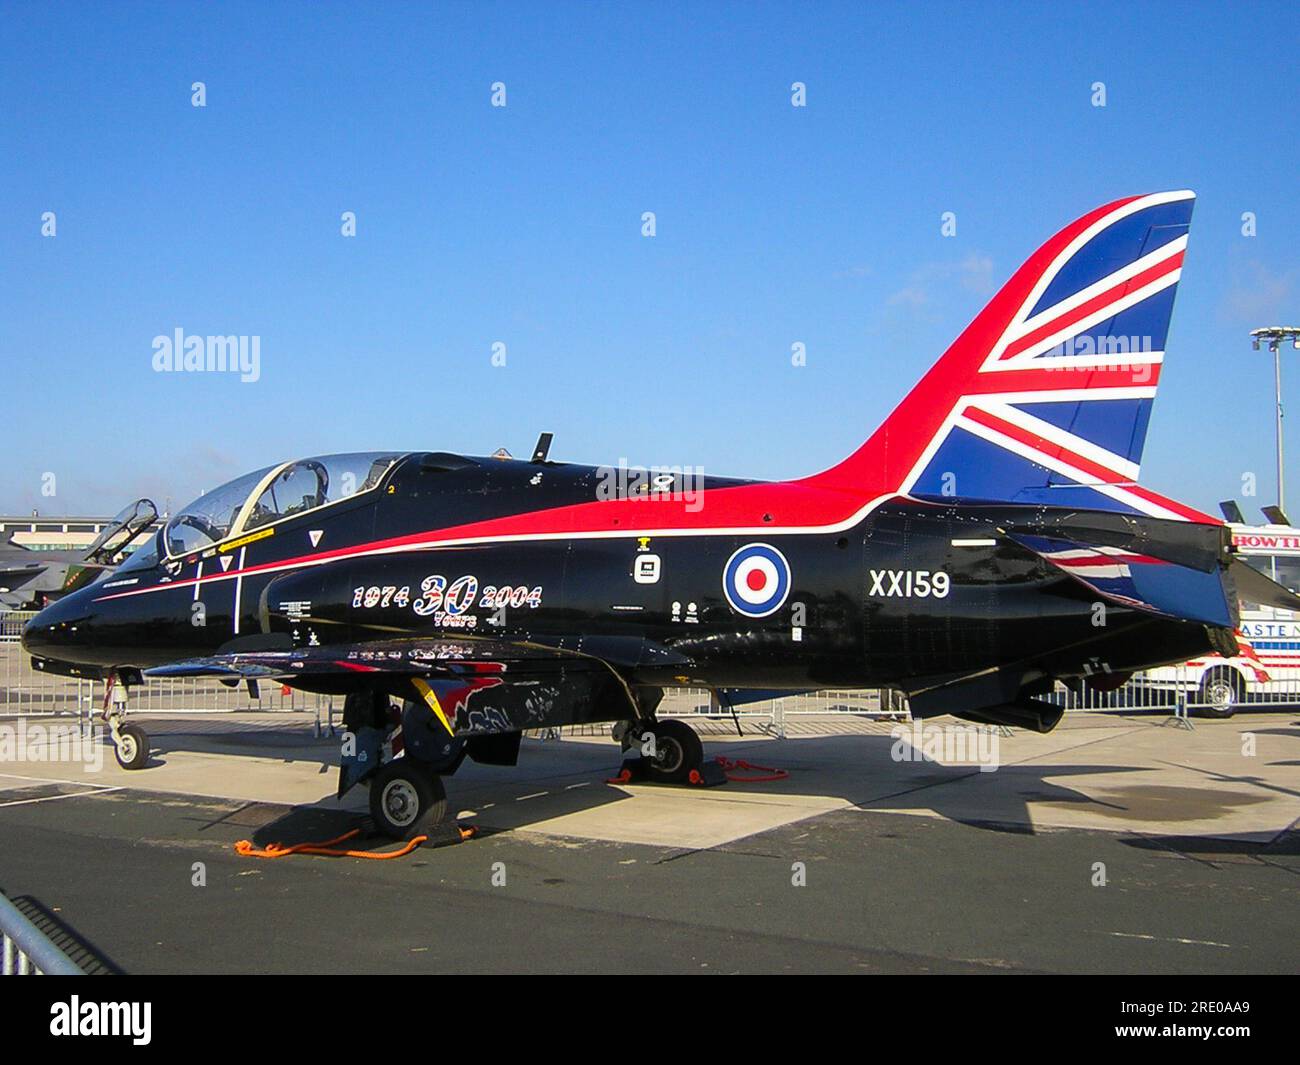 Hawker Siddeley Hawk T1A XX159, BAe Hawk, jet trainer plane in special scheme commemorating 30 years of service by the type in the Royal Air Force Stock Photo